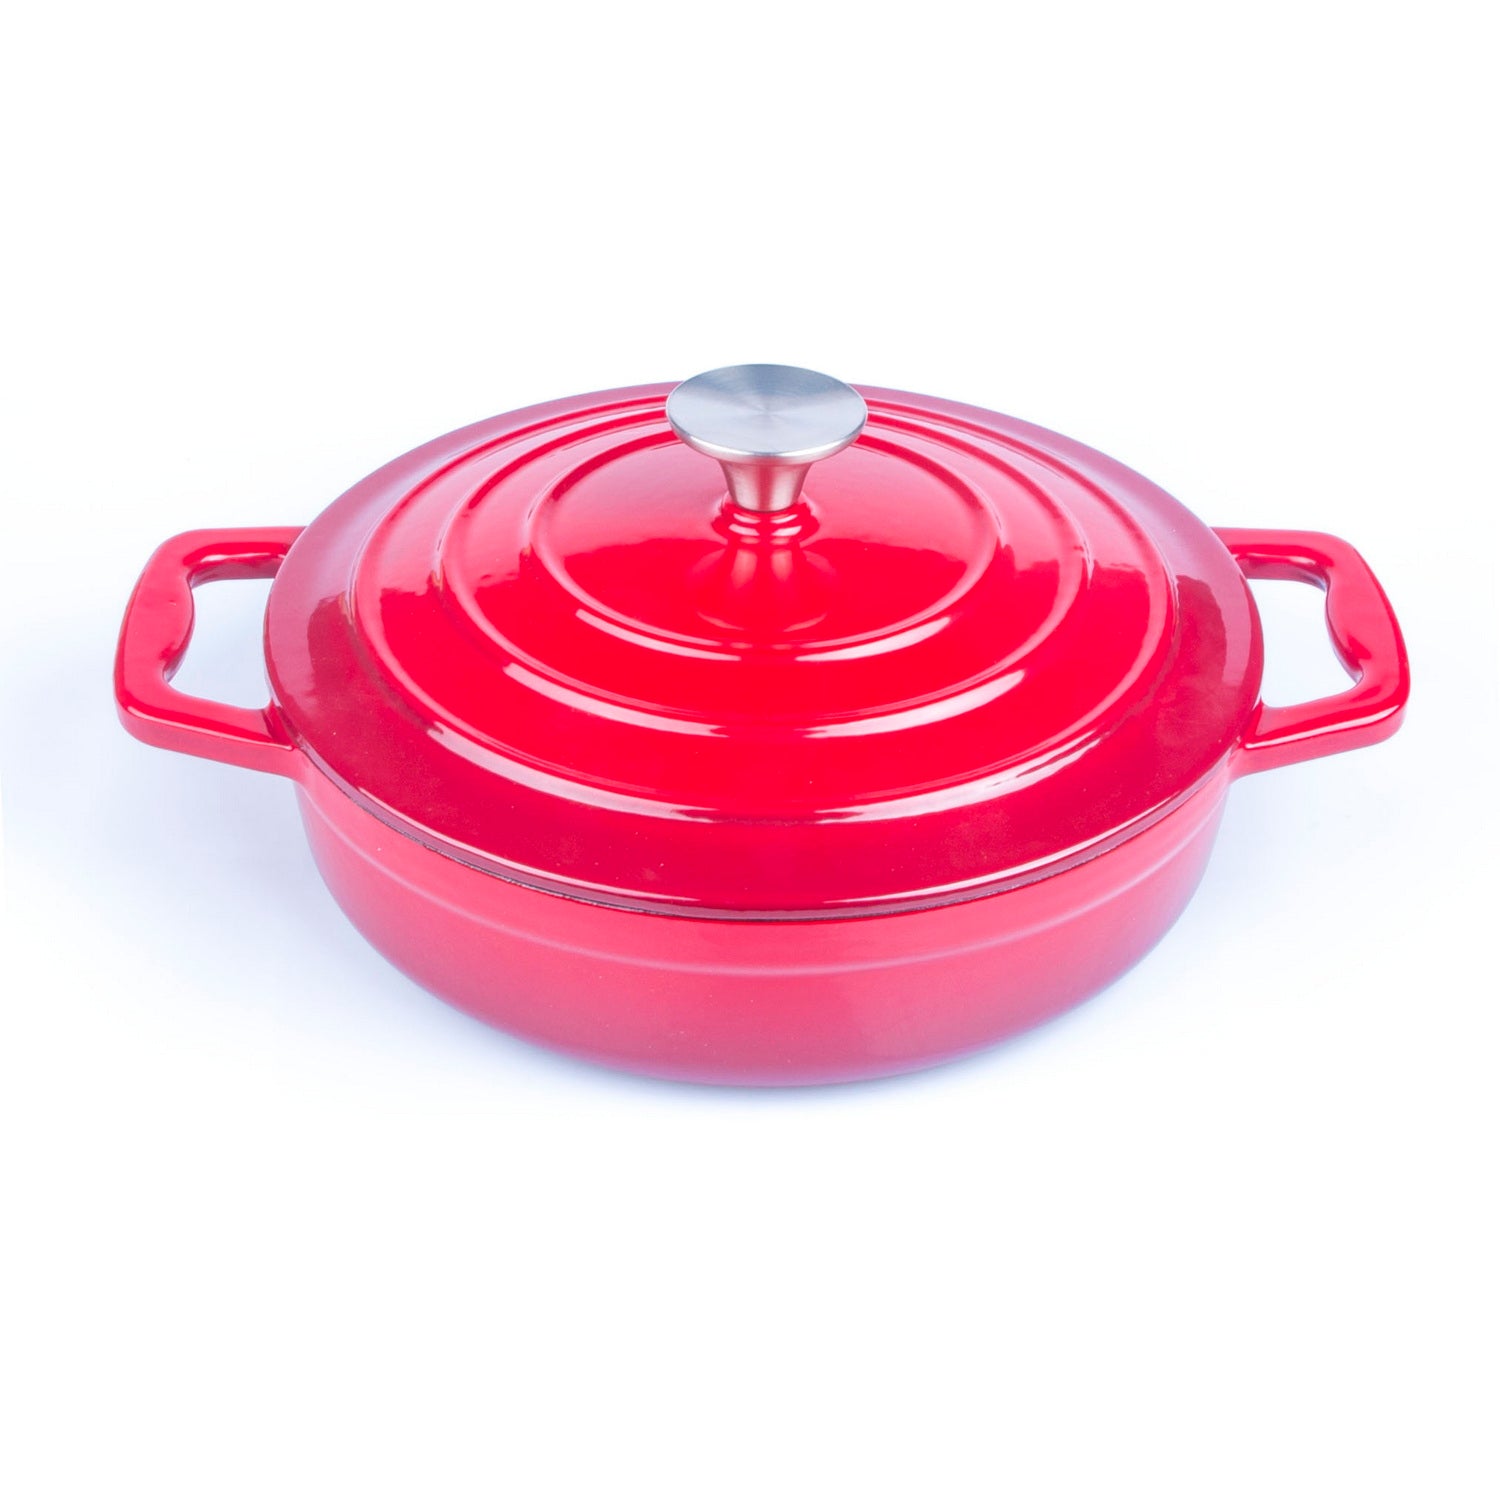 Enameled Cast Iron Cookware Casserole Braiser Pan, Round CastIron Skillet lid for Oven Red